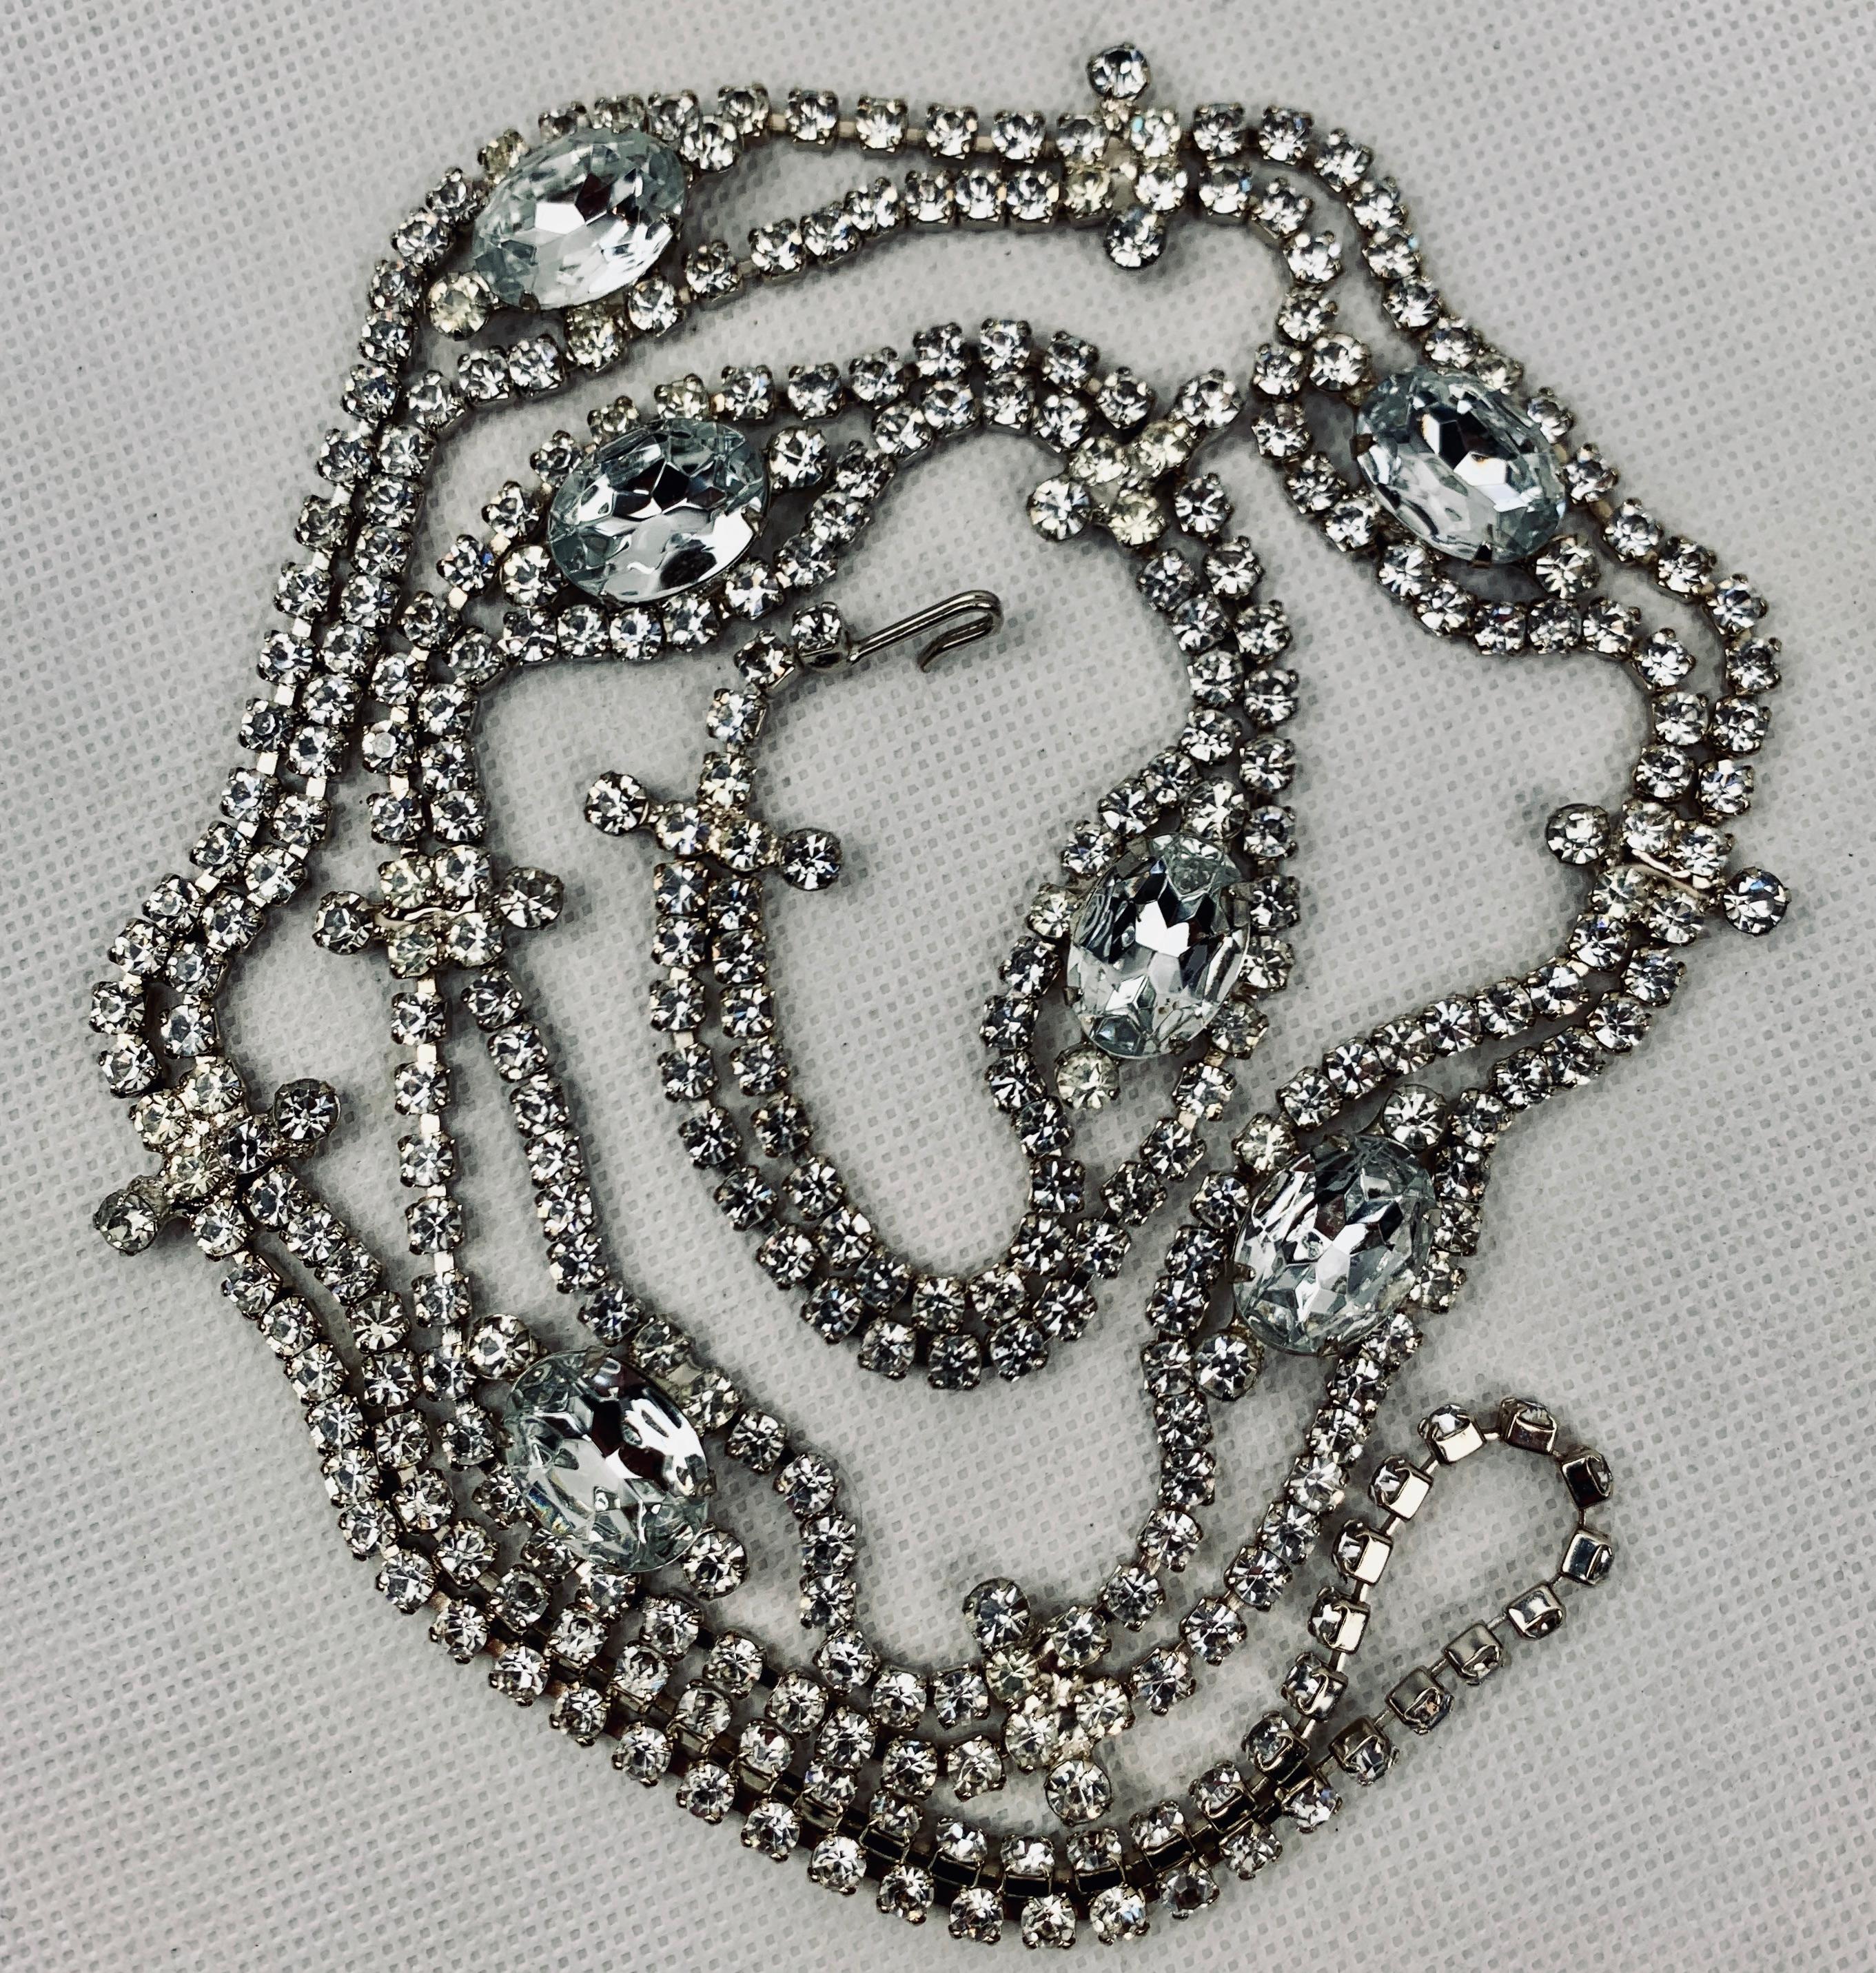 Eye catching 1960's rhinestone belt that would look great as a necklace.  There are six large oval stones connected between a double strand of round stones.  All of the stones are prong set.  At the end of this piece there is a hook for connecting